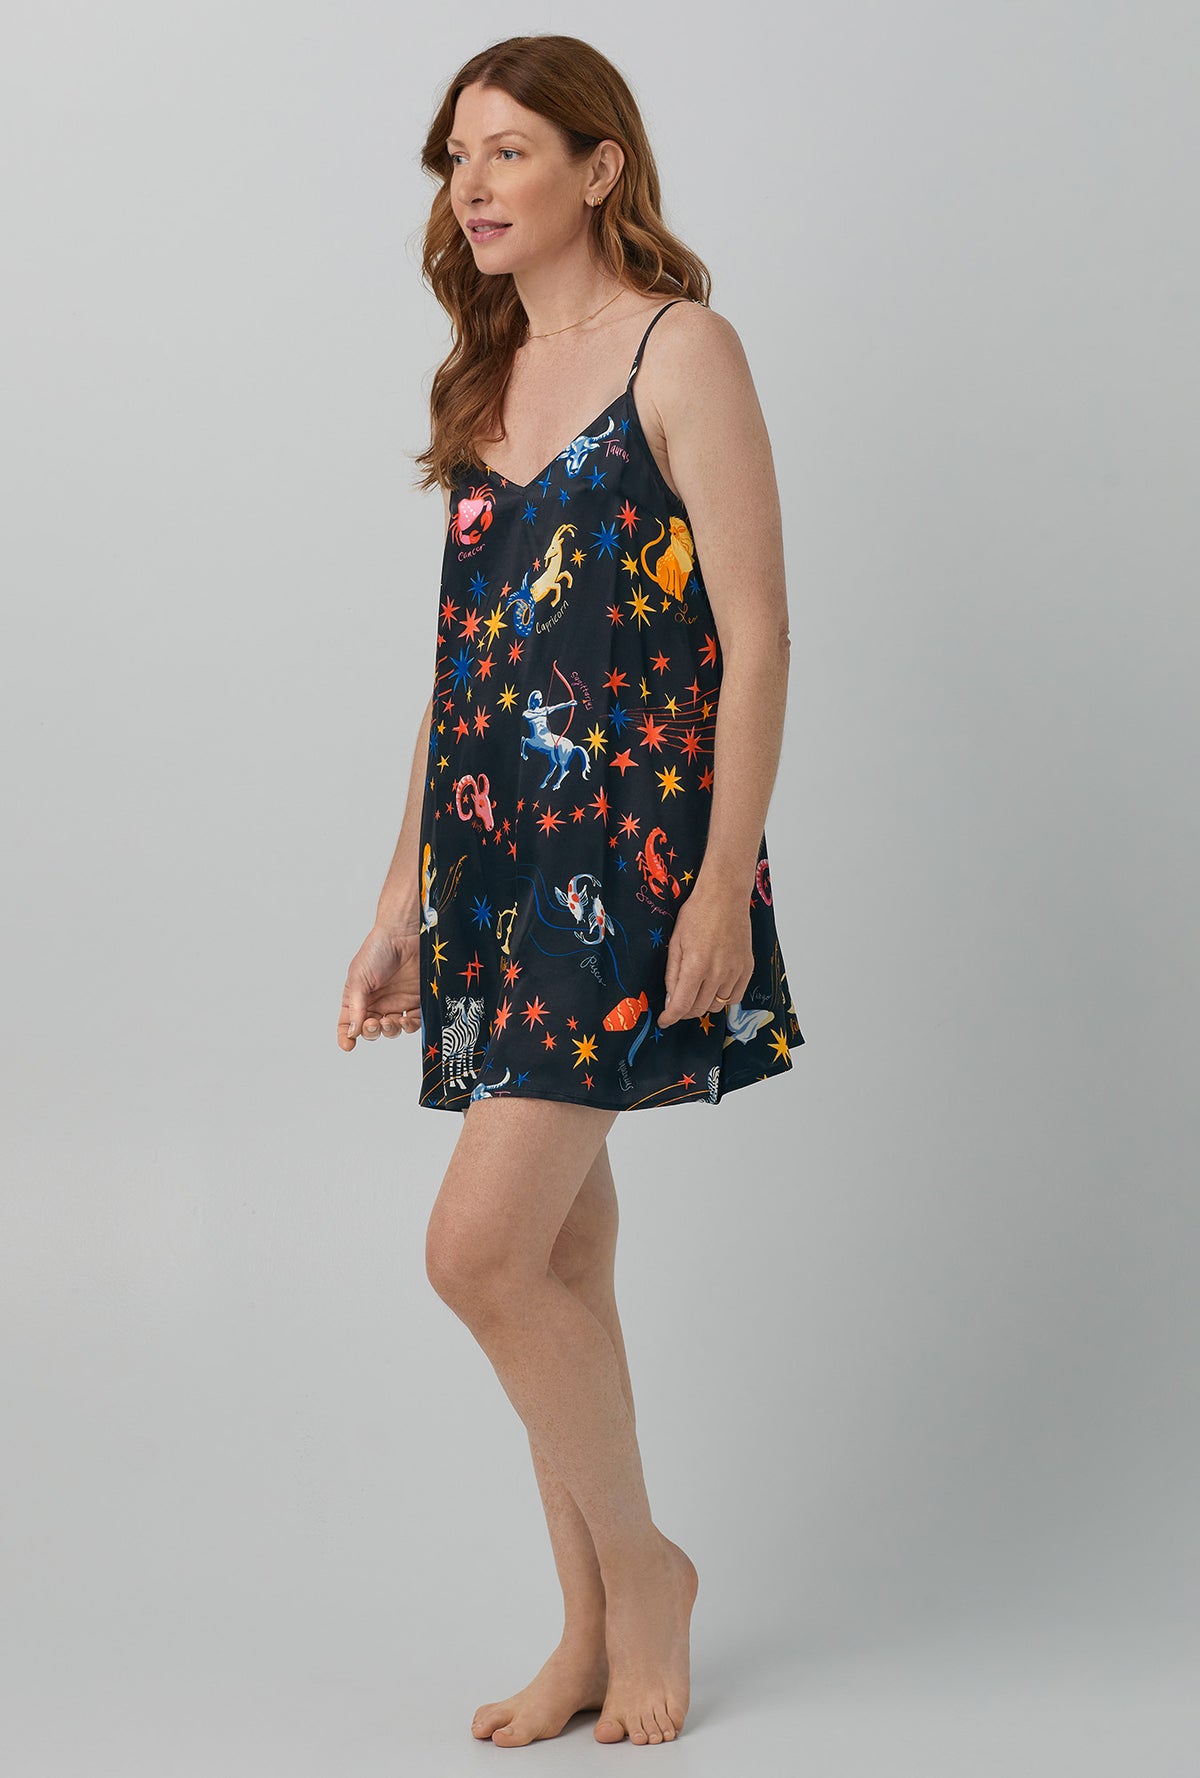 A lady wearing black  Washable Silk Satin Chemise with Celestial Dreams print